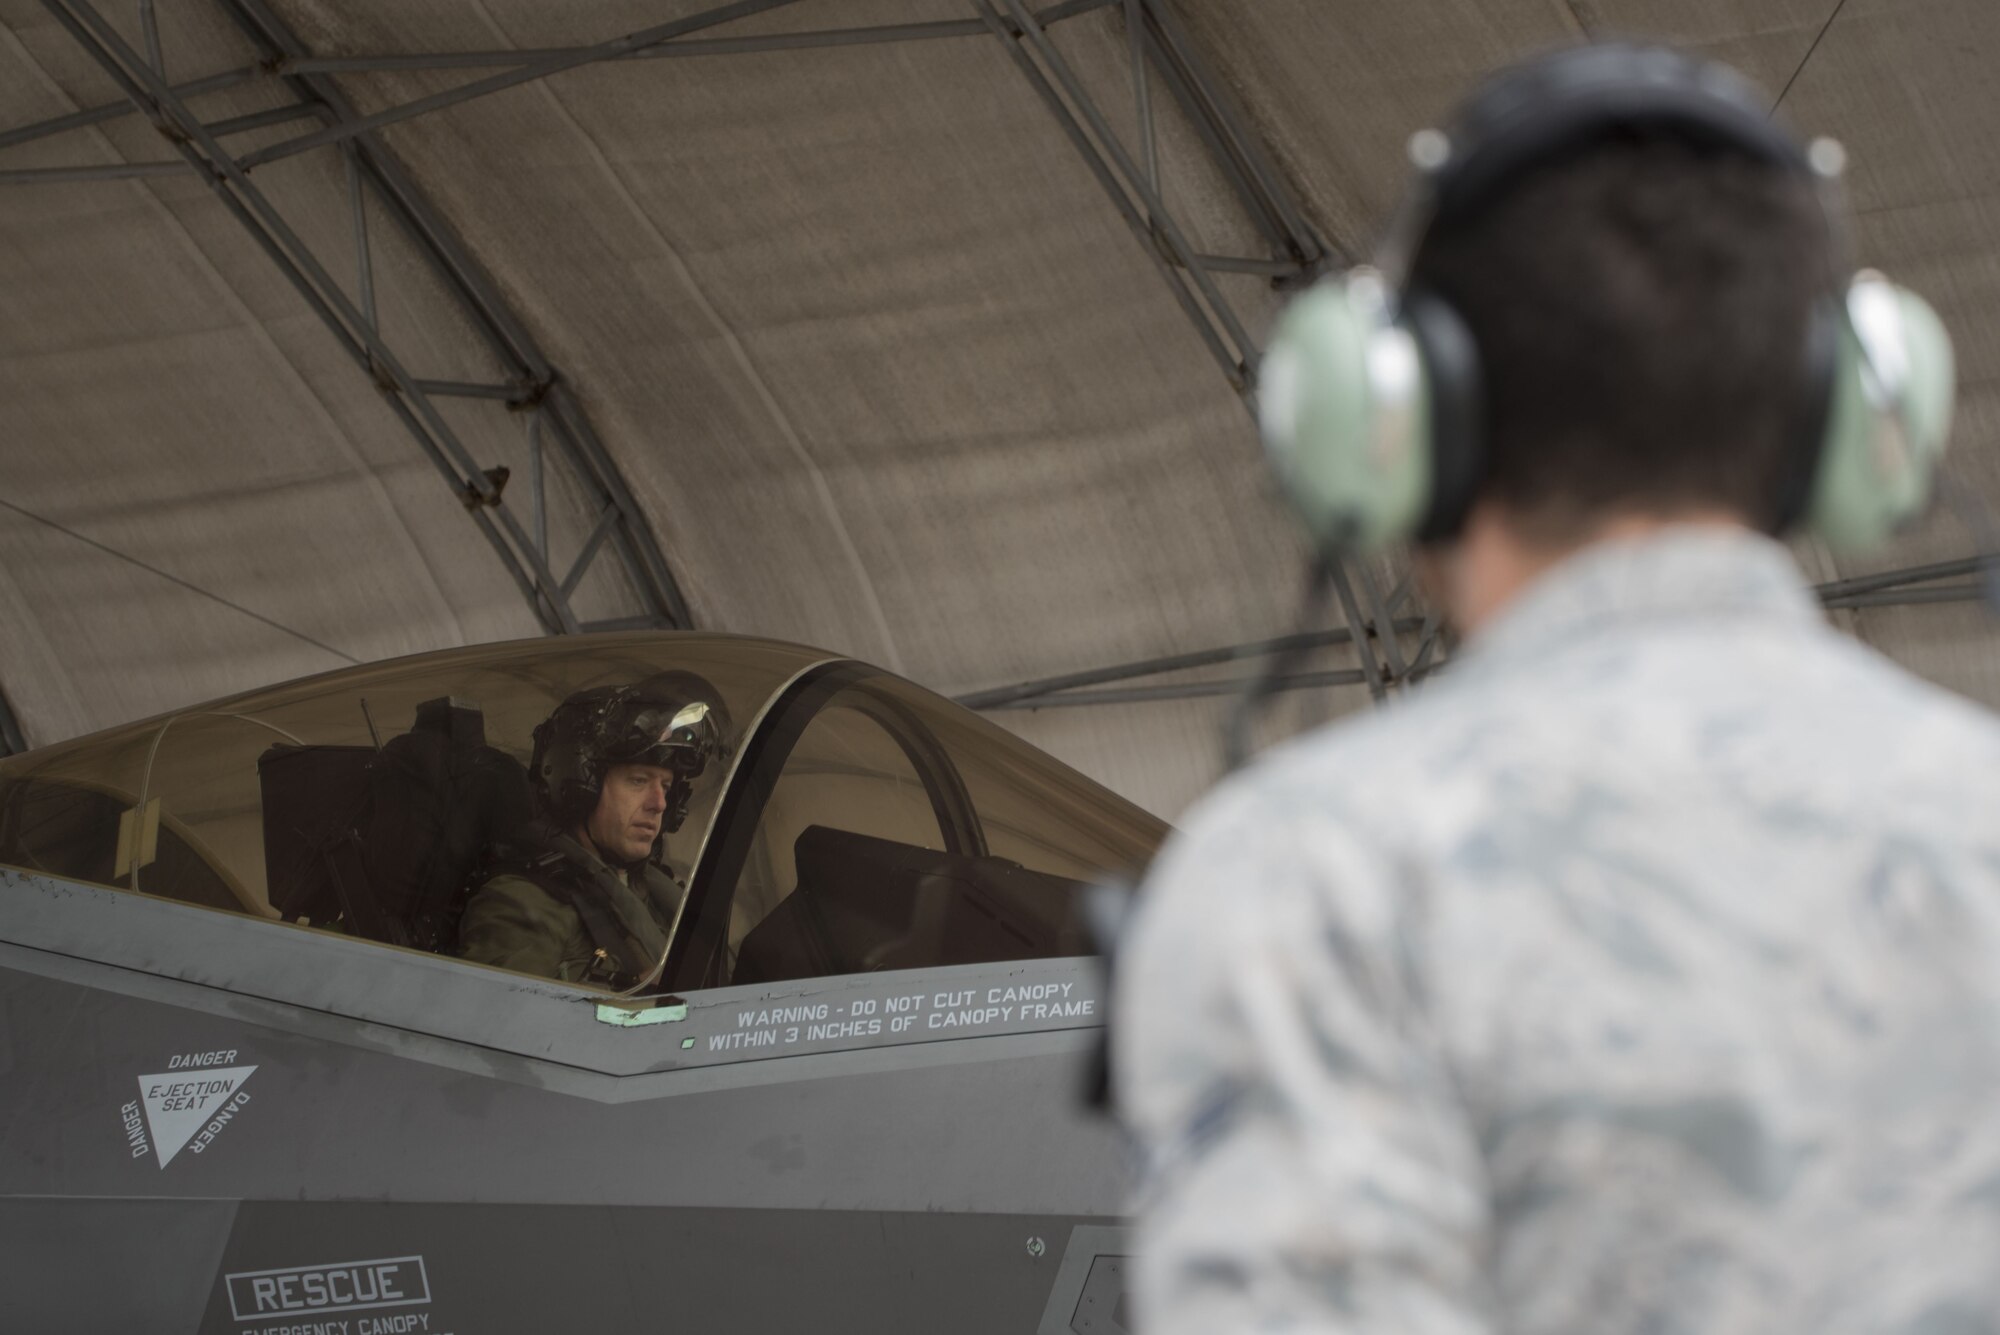 U.S Air Force Lt. Col. Bradley Turner, 86th Fighter Weapons Squadron F-35 lead evaluator, sits in an F-35A Lightning II prior to take off Jan. 29, 2018, at Eglin Air Force Base, Fla. The 33rd Fighter Wing conducted the first of its kind expanded Lightning Top Off Course designed to ensure F-35A pilots are prepared to enter the Combat Air Forces. The exercise is an opportunistic enhancement of LiTOC to shorten the training timeline while improving the quality of mission qualifications training. (U.S. Air Force photo by Staff Sgt. Peter Thompson/Released)